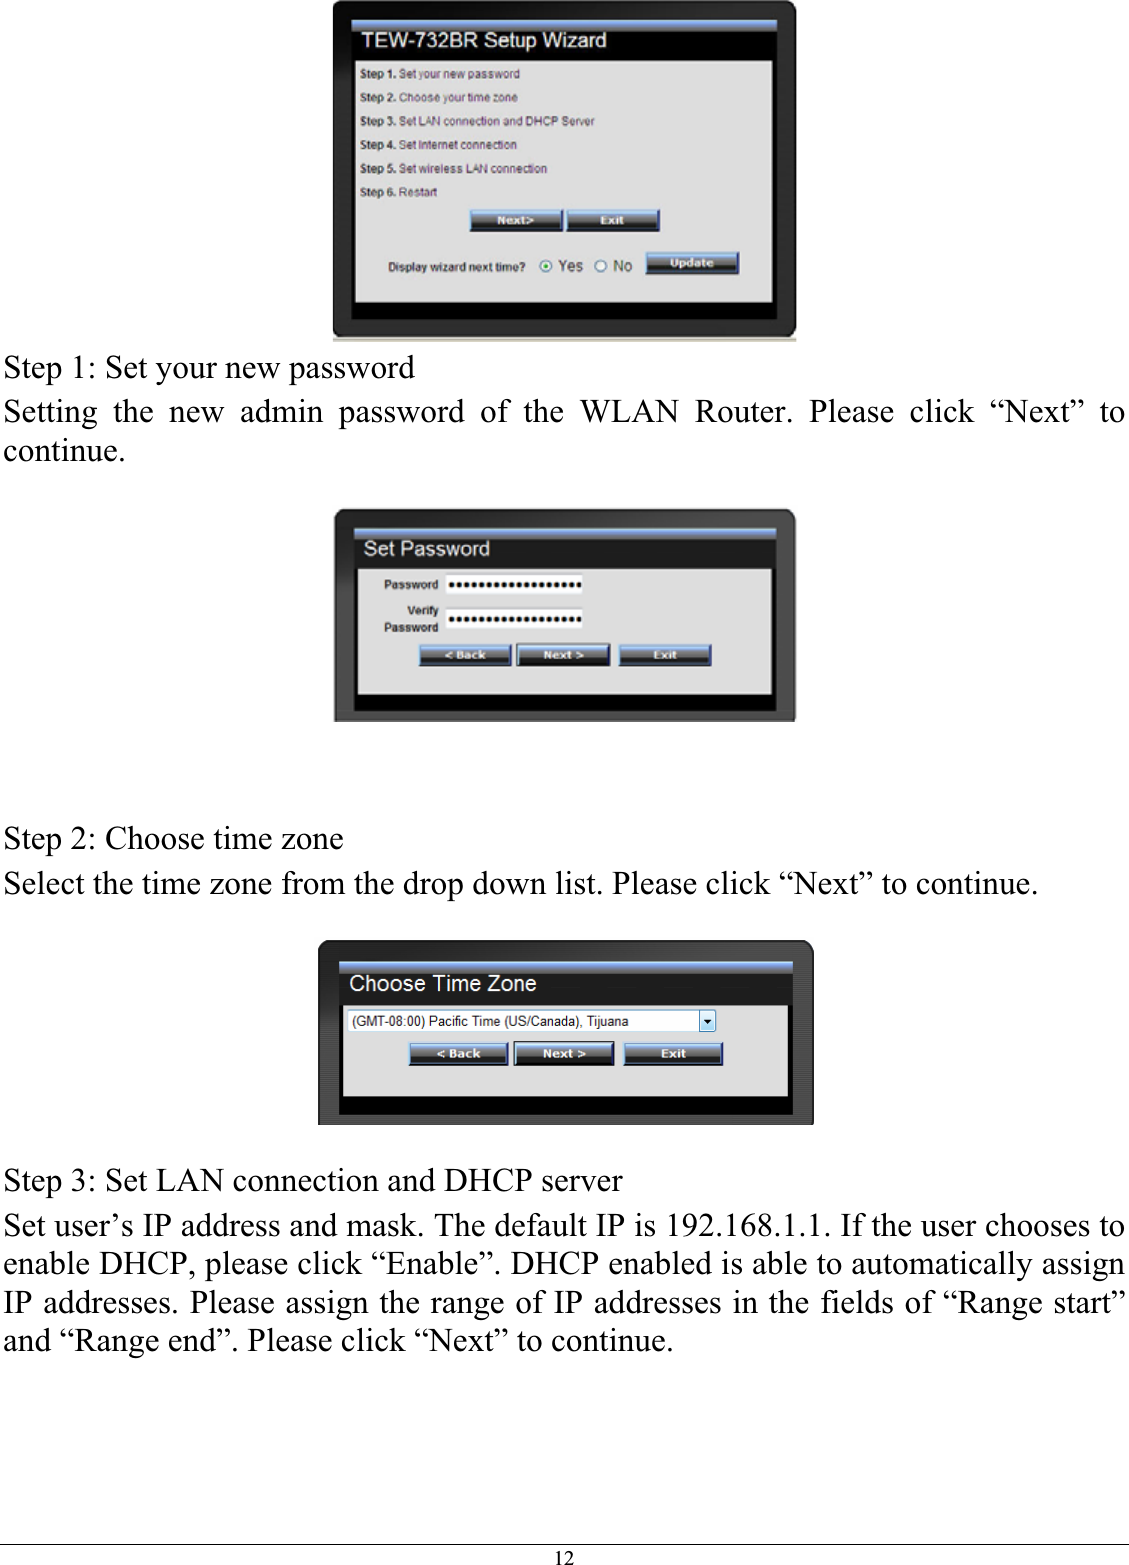 12Step 1: Set your new password Setting the new admin password of the WLAN Router. Please click “Next” to continue.Step 2: Choose time zone Select the time zone from the drop down list. Please click “Next” to continue. Step 3: Set LAN connection and DHCP server Set user’s IP address and mask. The default IP is 192.168.1.1. If the user chooses to enable DHCP, please click “Enable”. DHCP enabled is able to automatically assign IP addresses. Please assign the range of IP addresses in the fields of “Range start” and “Range end”. Please click “Next” to continue. 